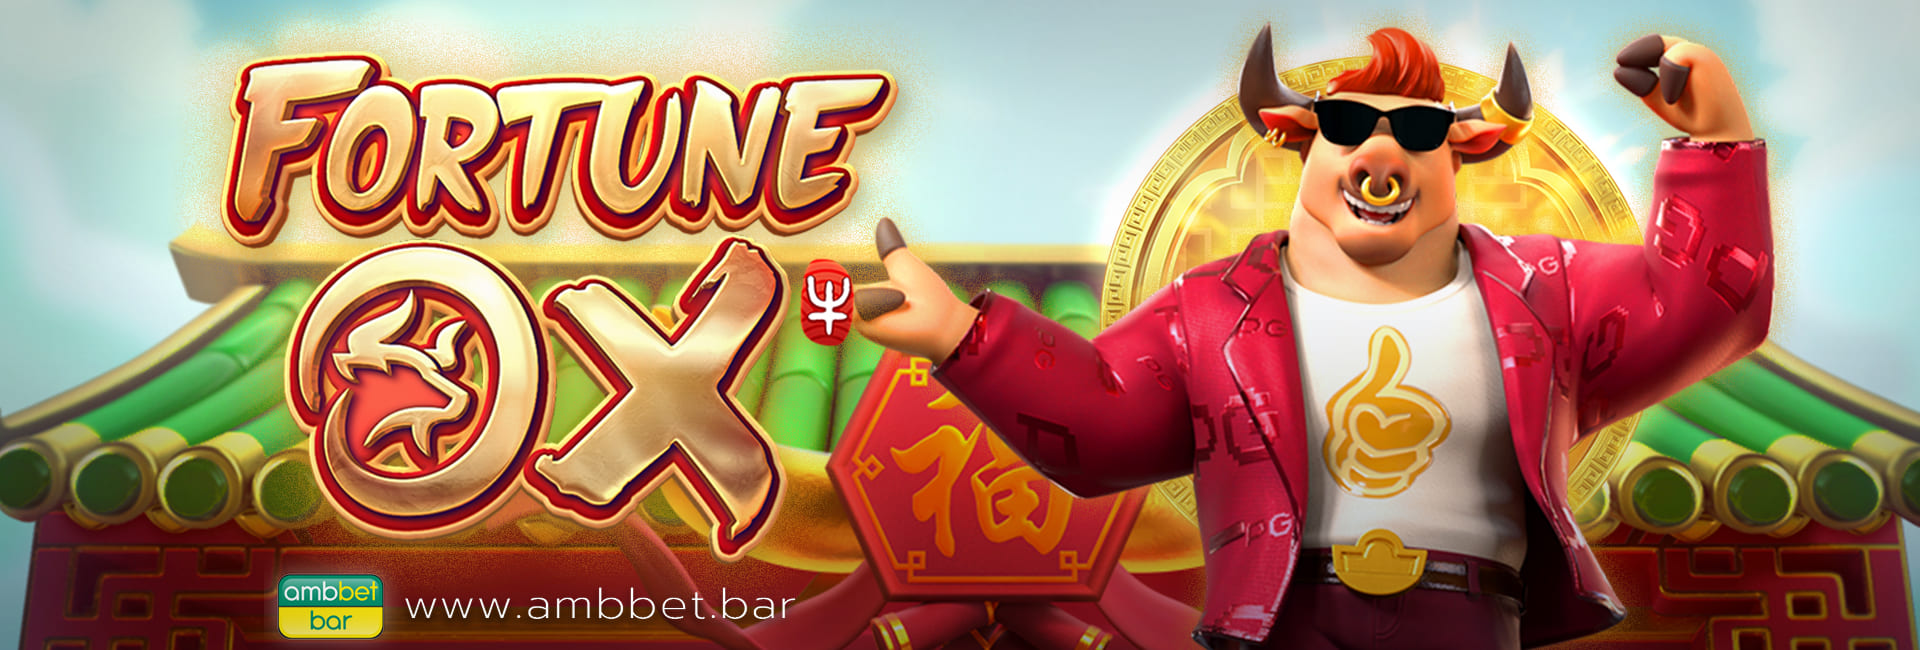 Fortune Ox mobile banner